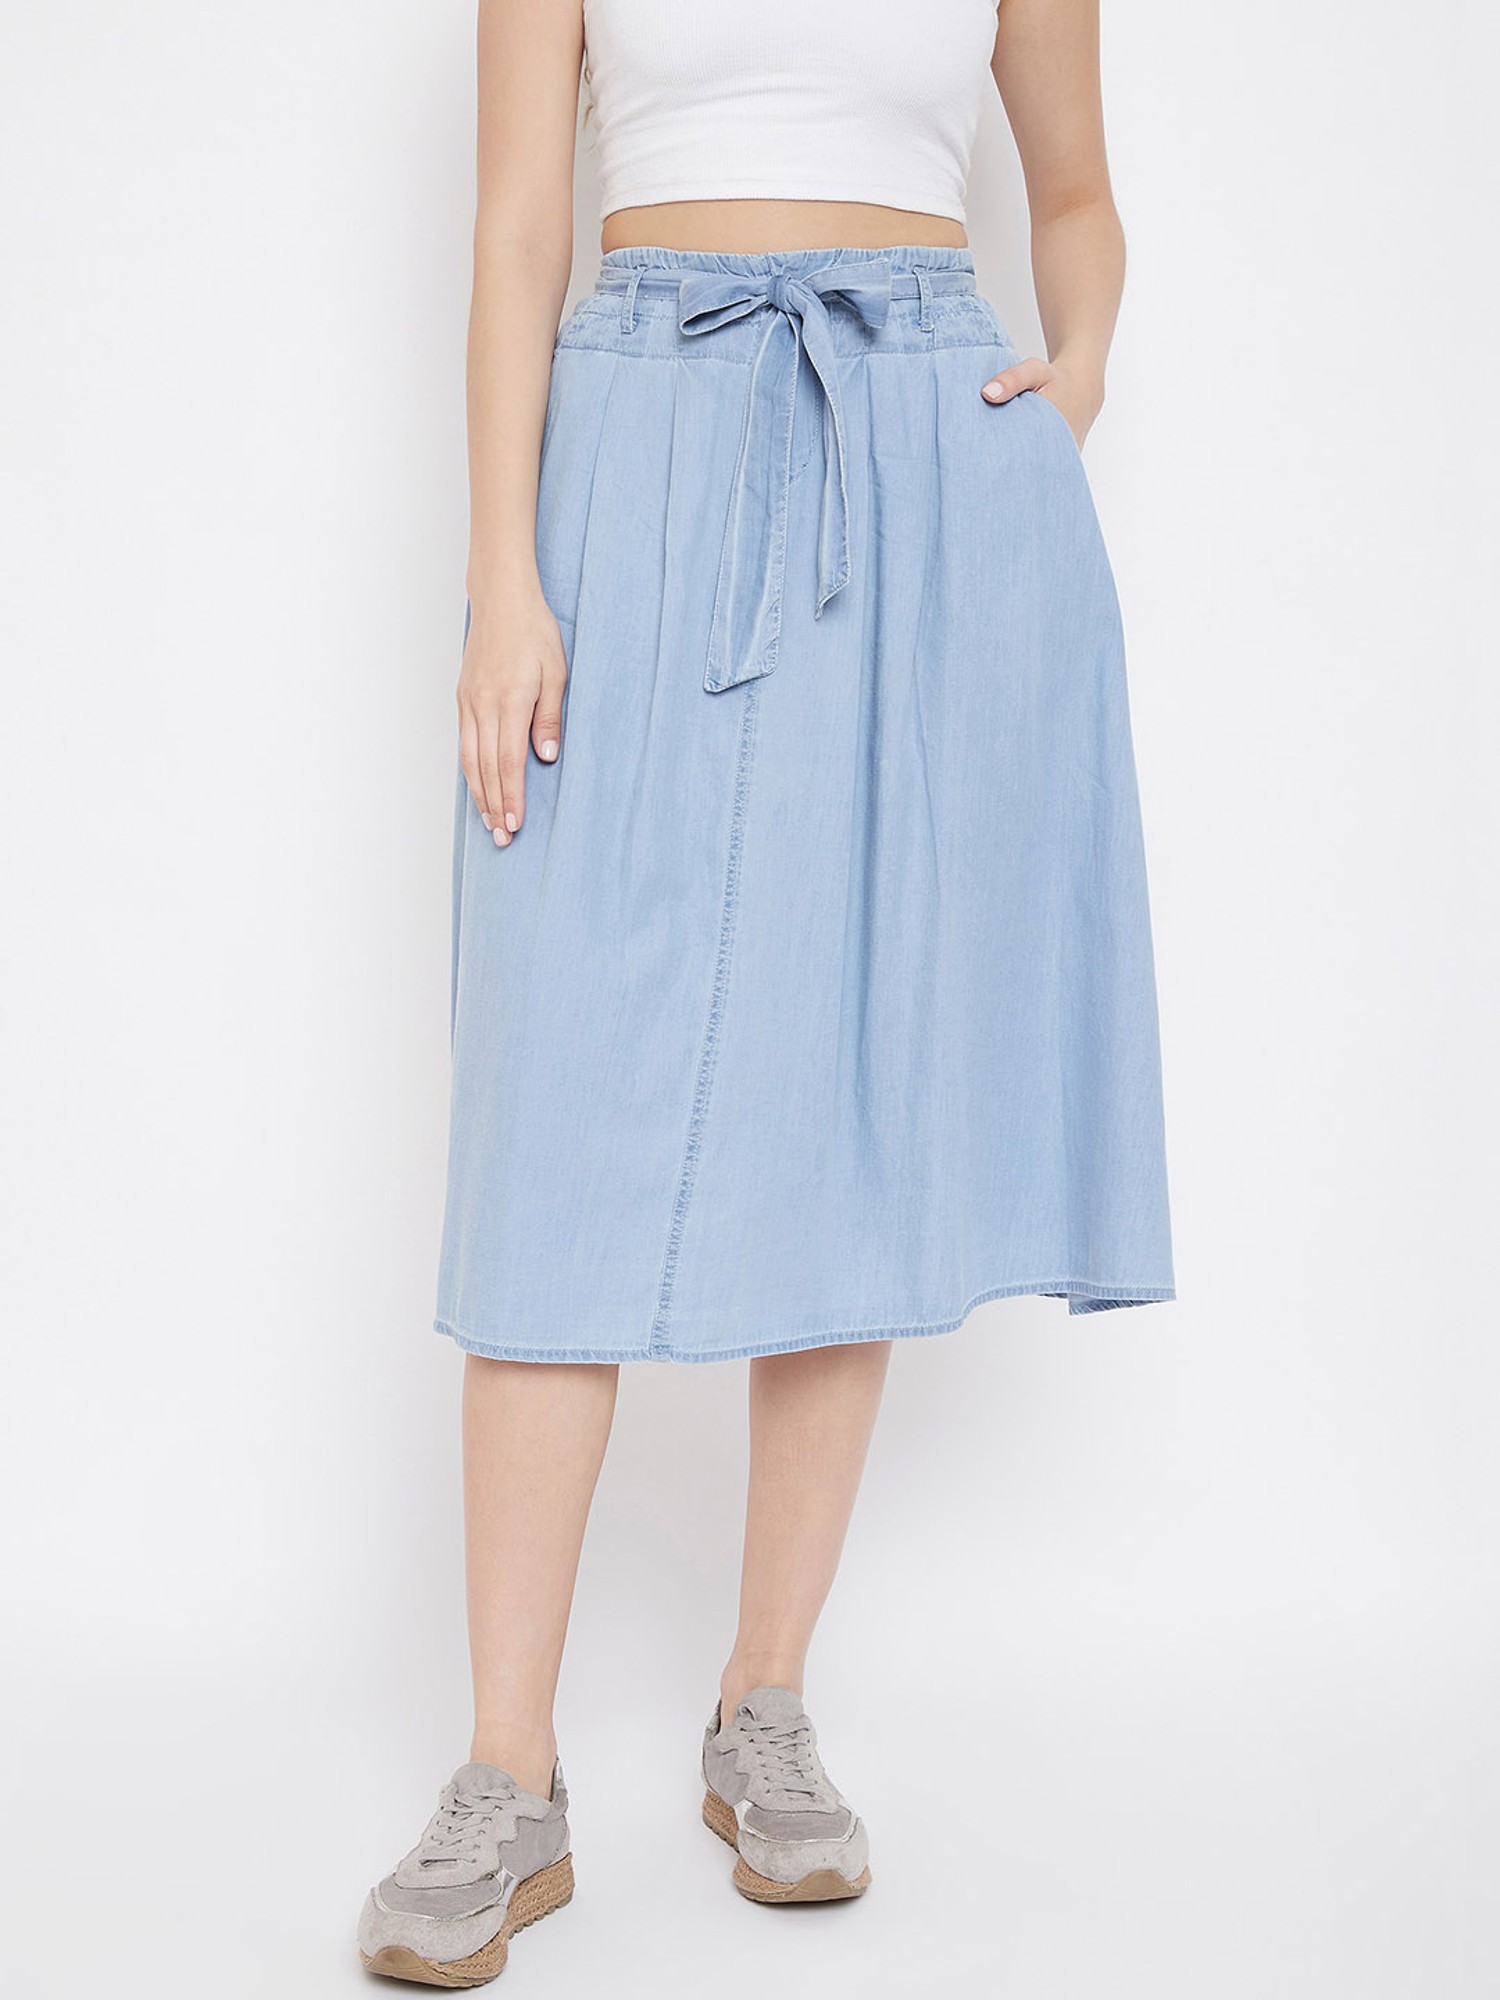 Shop A.P.C. Casual Style Denim Plain Skirts by goody0430 | BUYMA